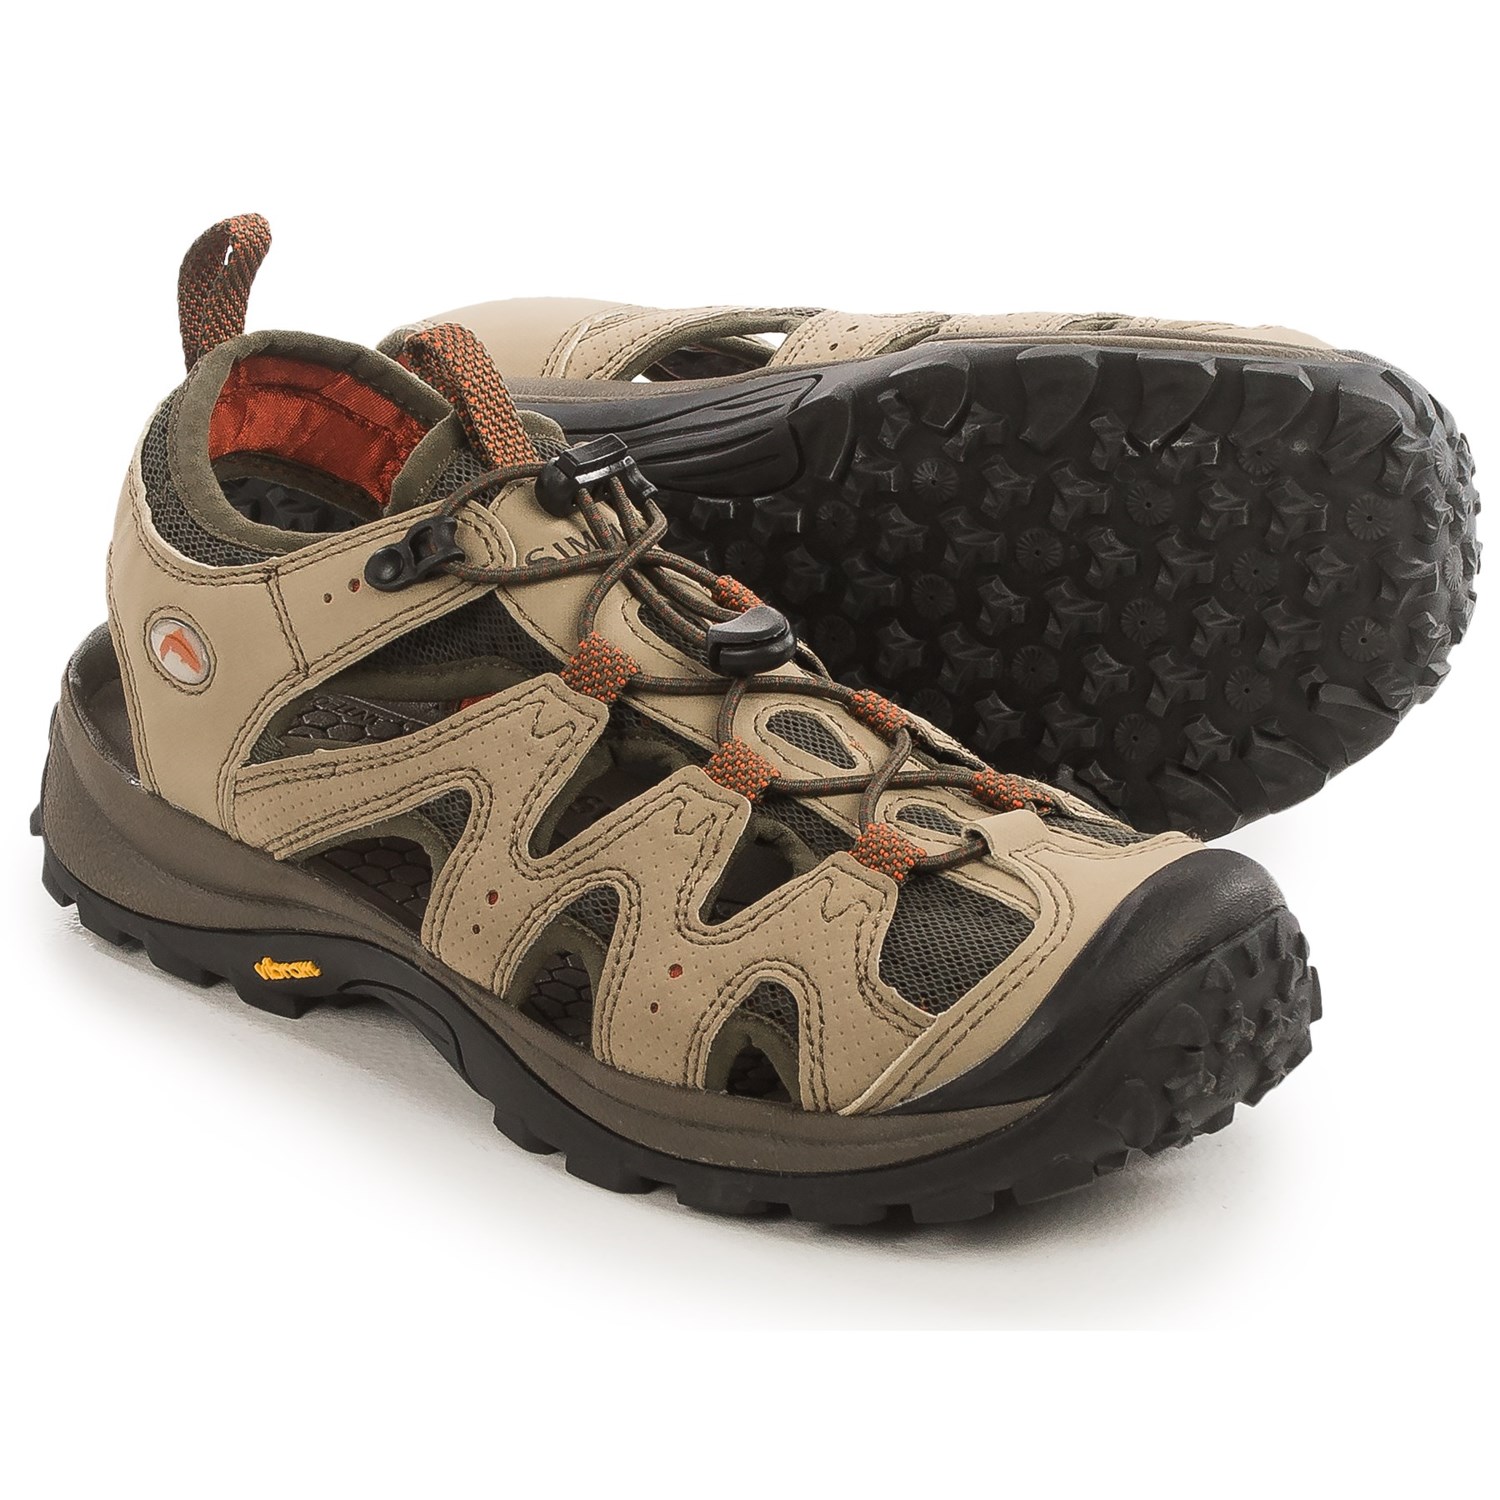 Simms Streamtread Fishing Sandals (For Men) 174PD - Save 49%